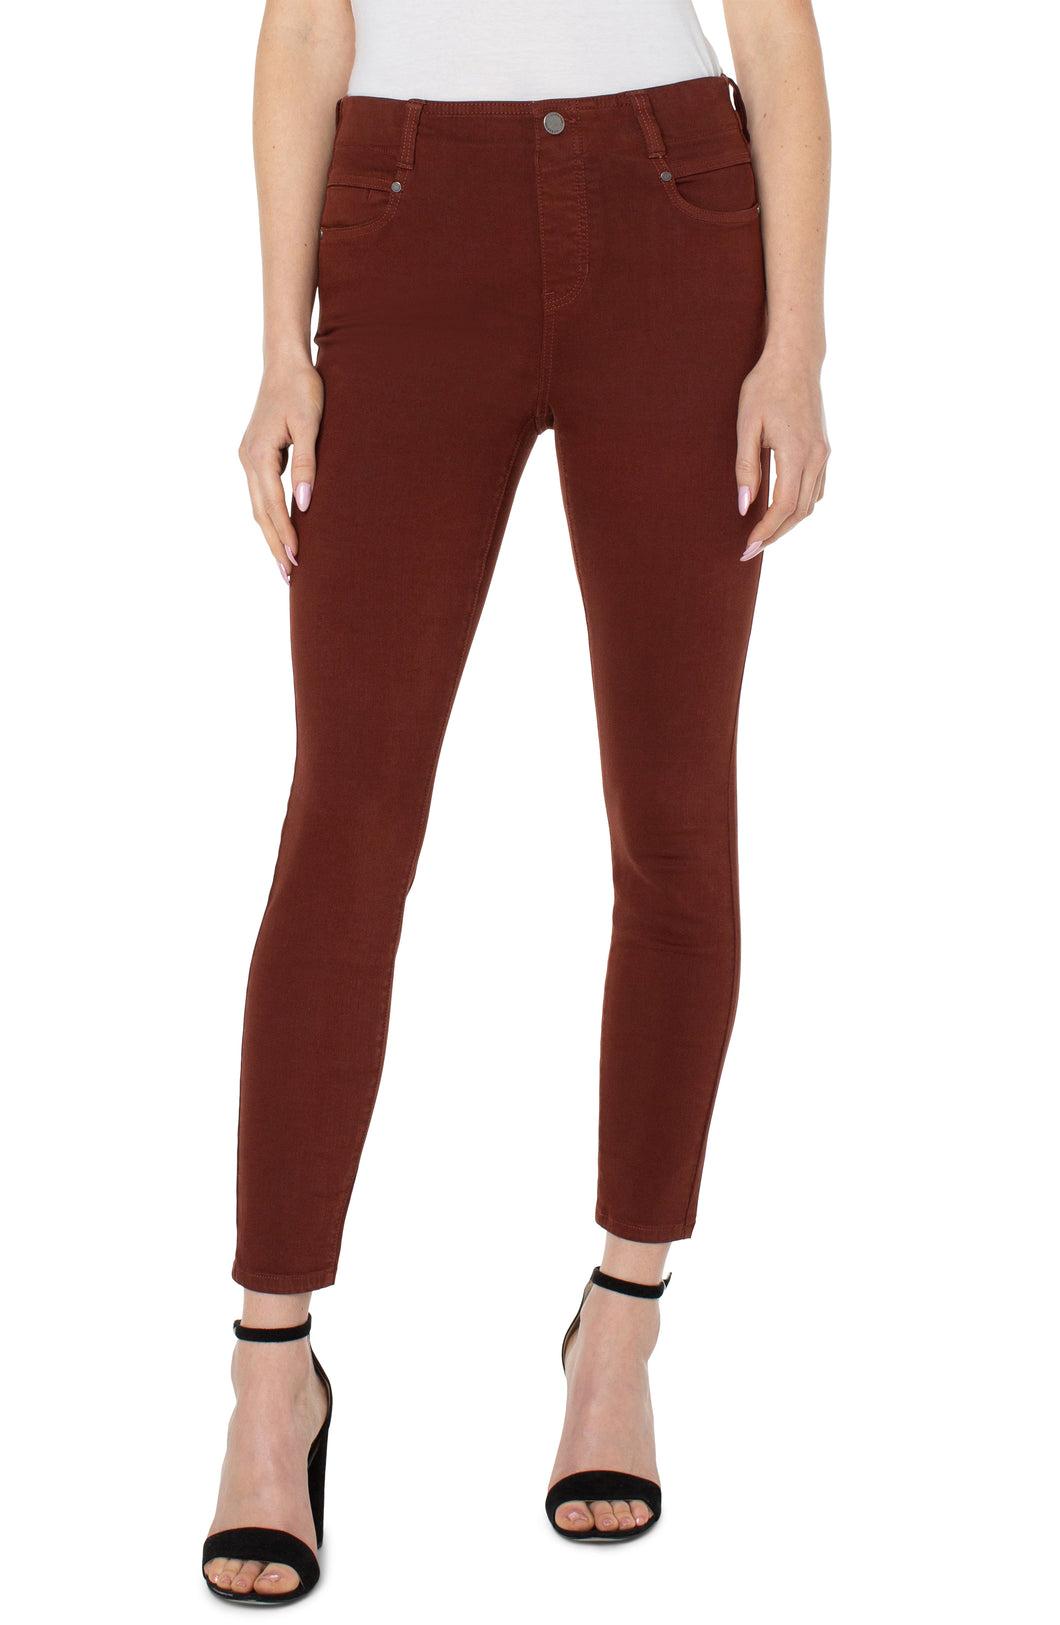 Liverpool Gia Glider Ankle Skinny Pull-On Pant/Jean in Brunette or Raisin